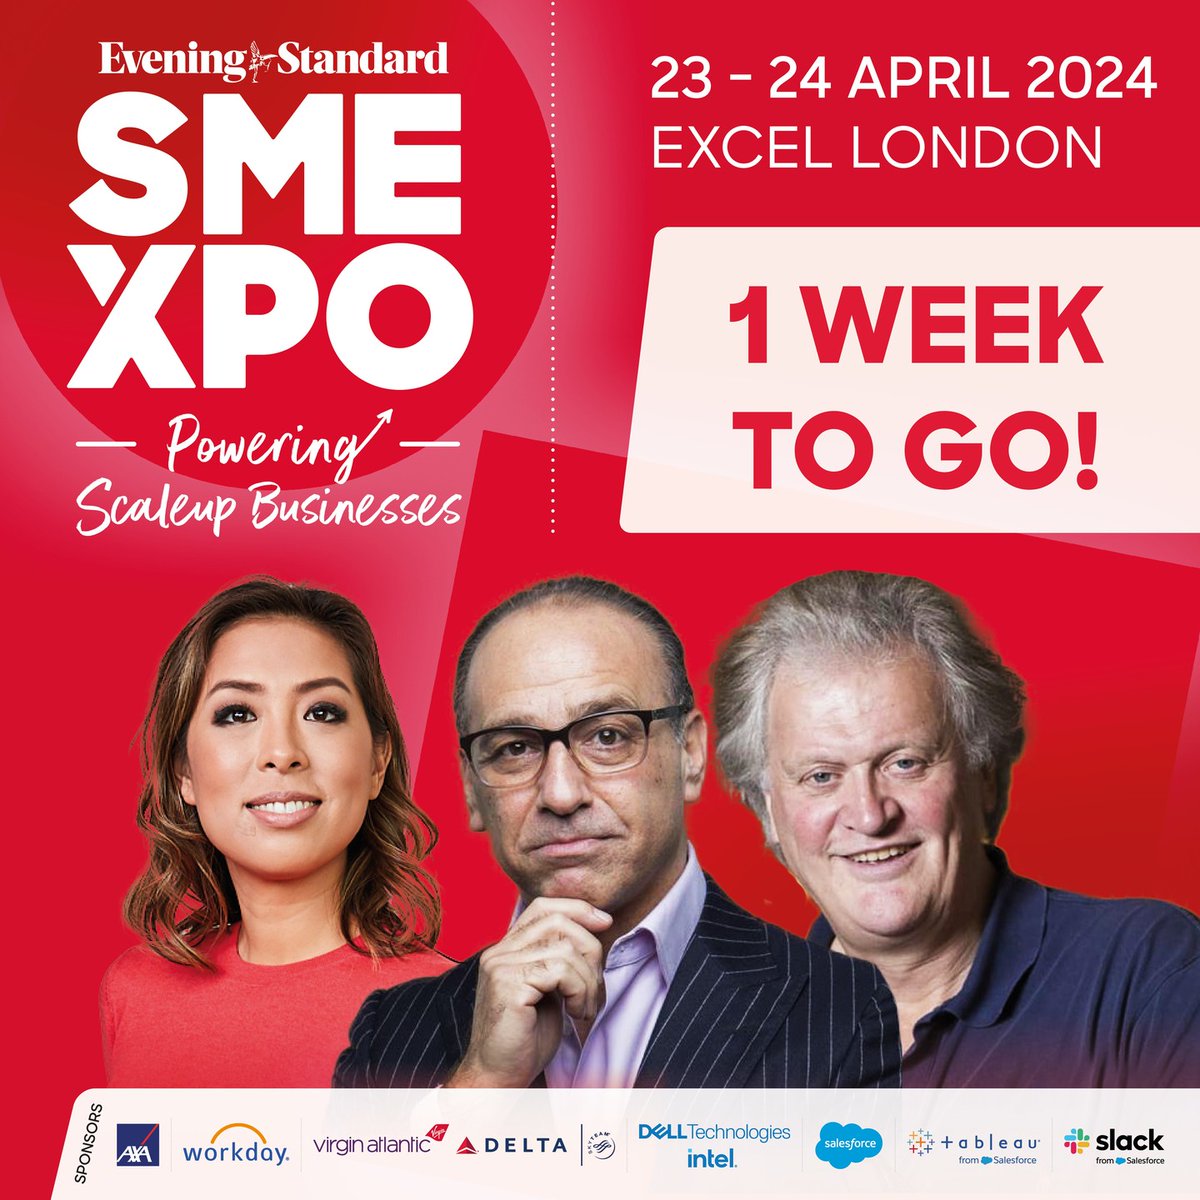 Come see us at the @SME_XPO at Excel London on 23-24 of April! We'll be talking food surplus, fundraising, volunteering and how you can get involved in helping to reduce food waste and food insecurity in our communities. We will be at Stand S452 Tickets: sme-xpo-2024.reg.buzz/socialmedia